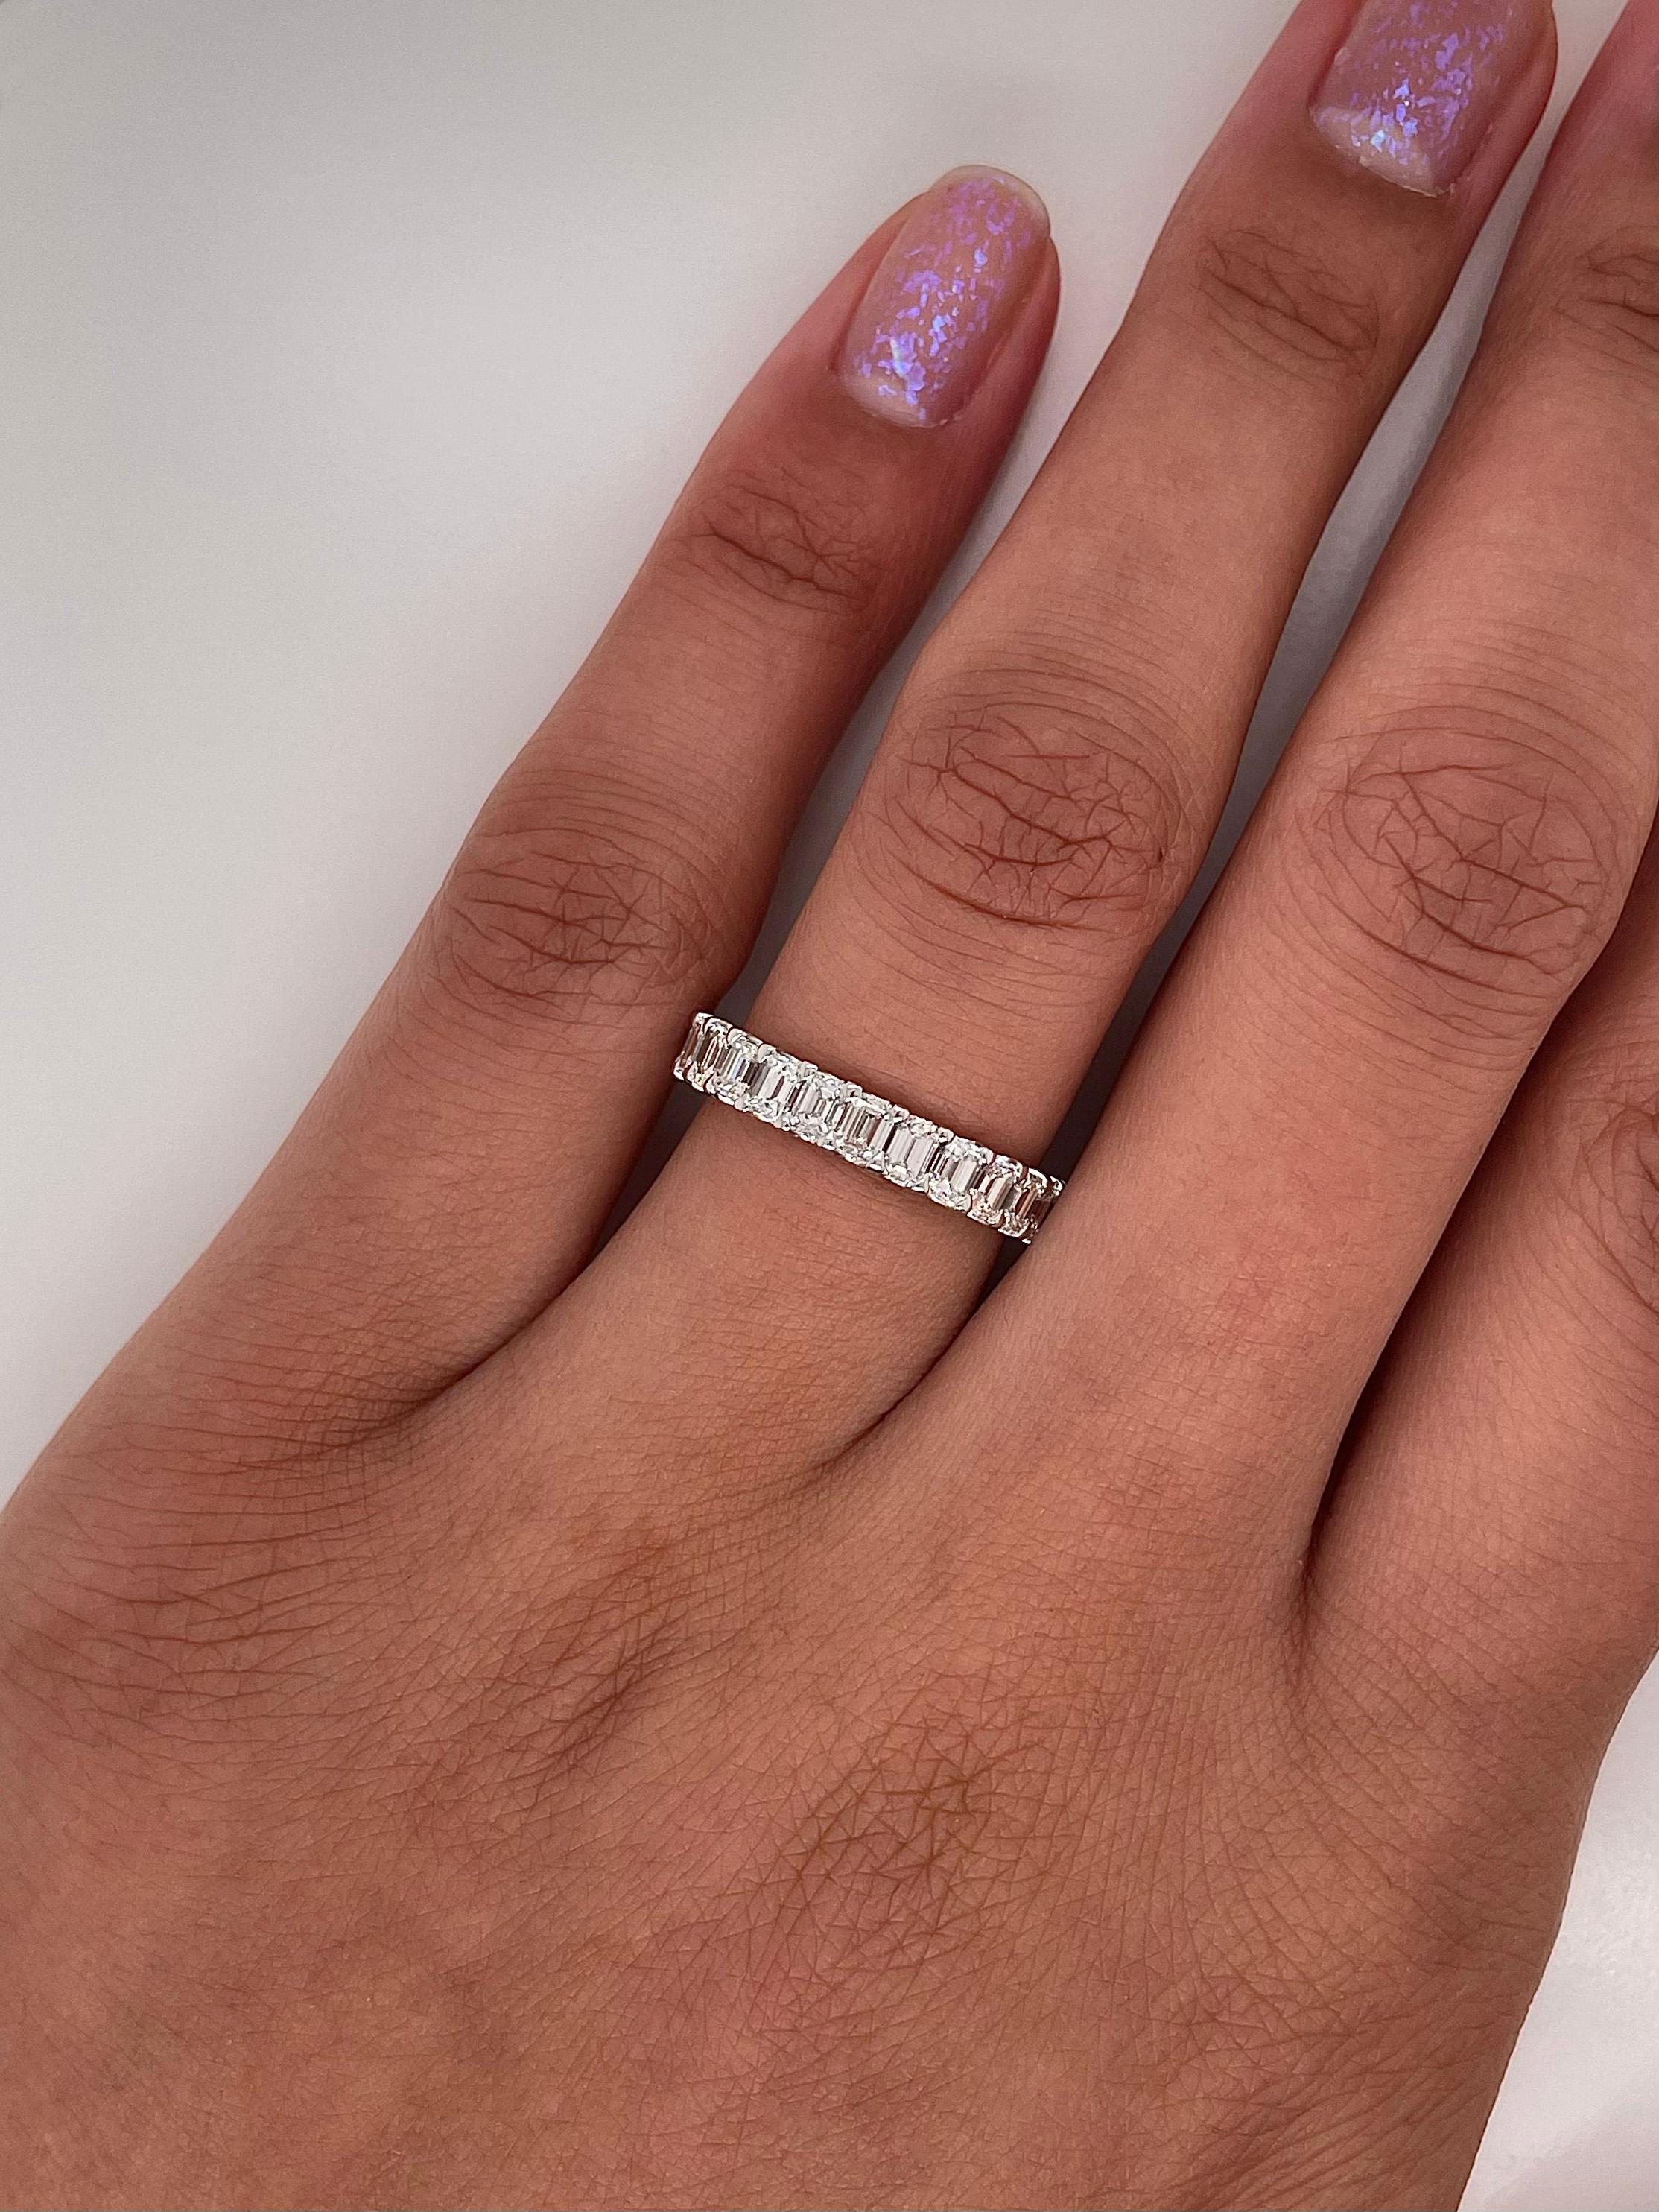 Ladies diamond Eternity band carries 2.63 total Carats emerald cut diamonds placed in platinum.

Size: 6.0
Color: G
Clarity: VS1

This shared prong style Eternity band was handmade by our jewelers in New York City.